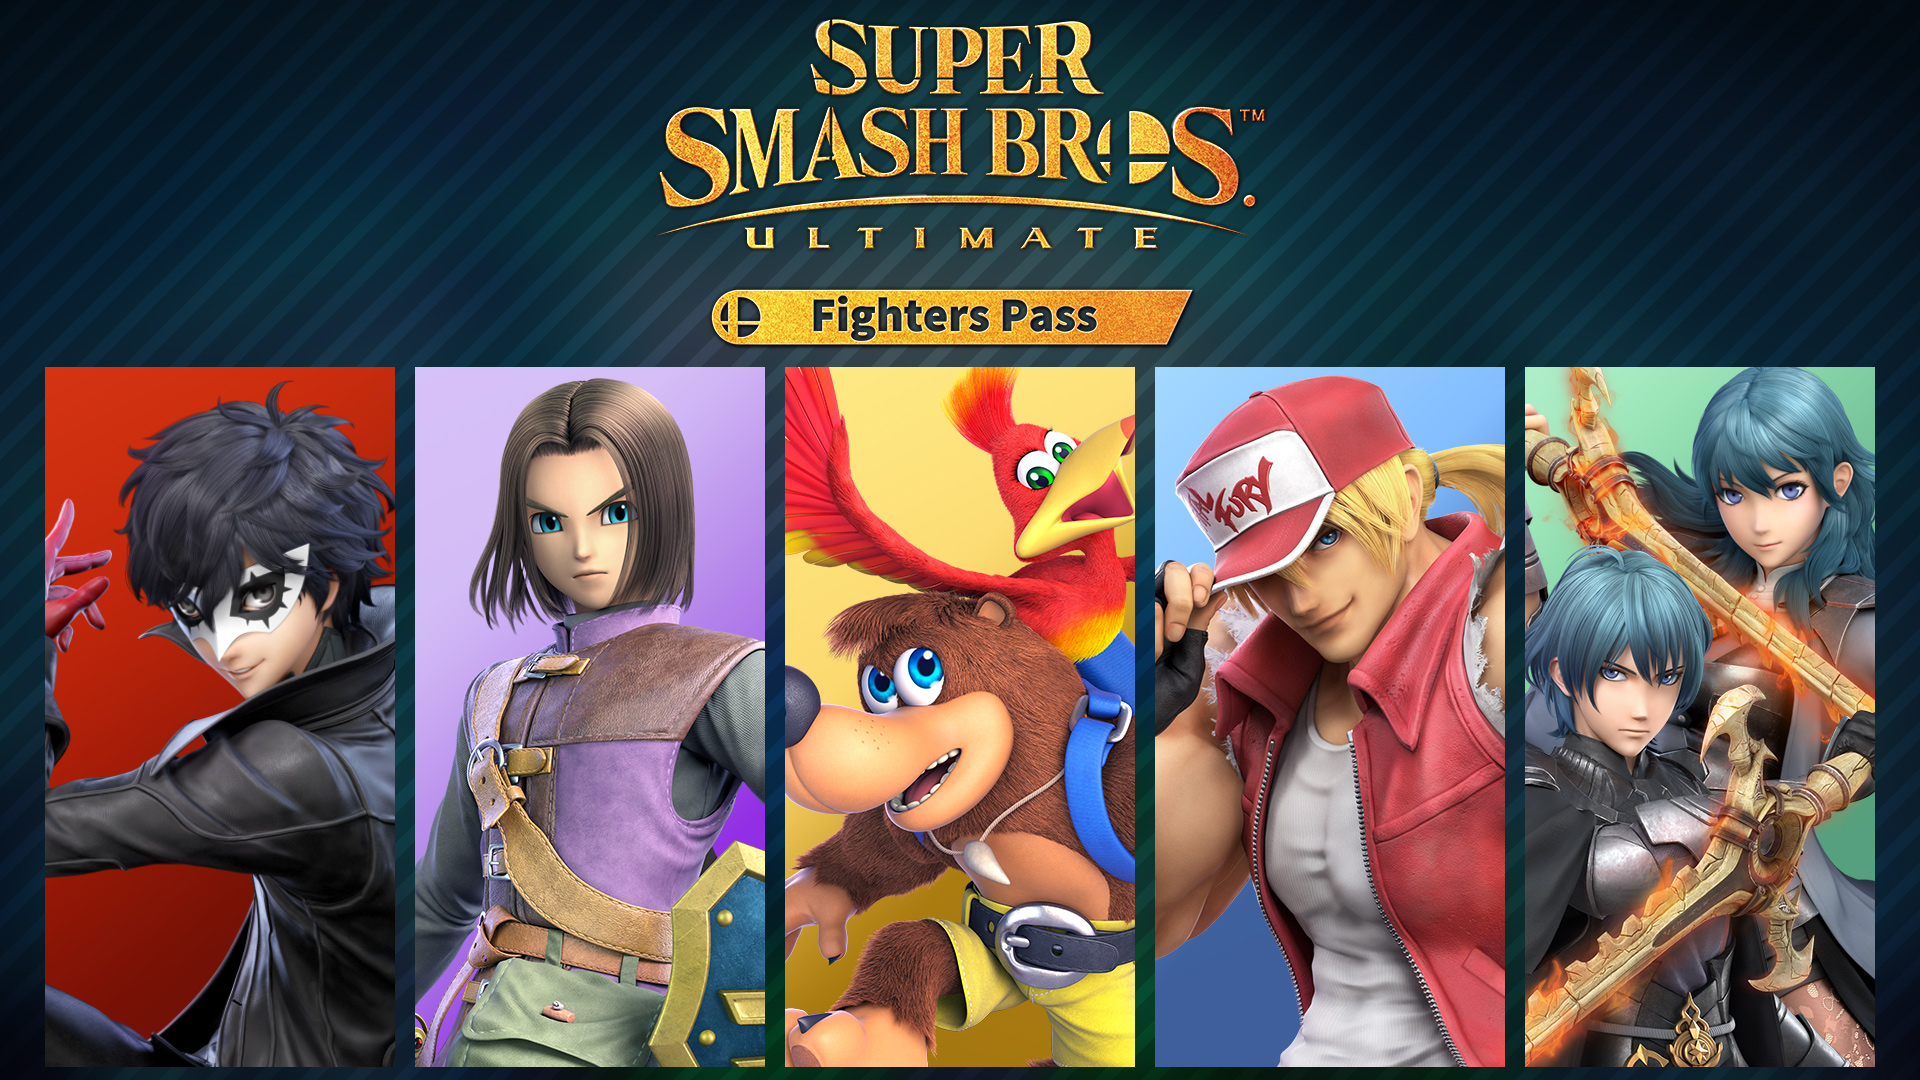 Super Smash Bros.™ Ultimate: Fighters Pass